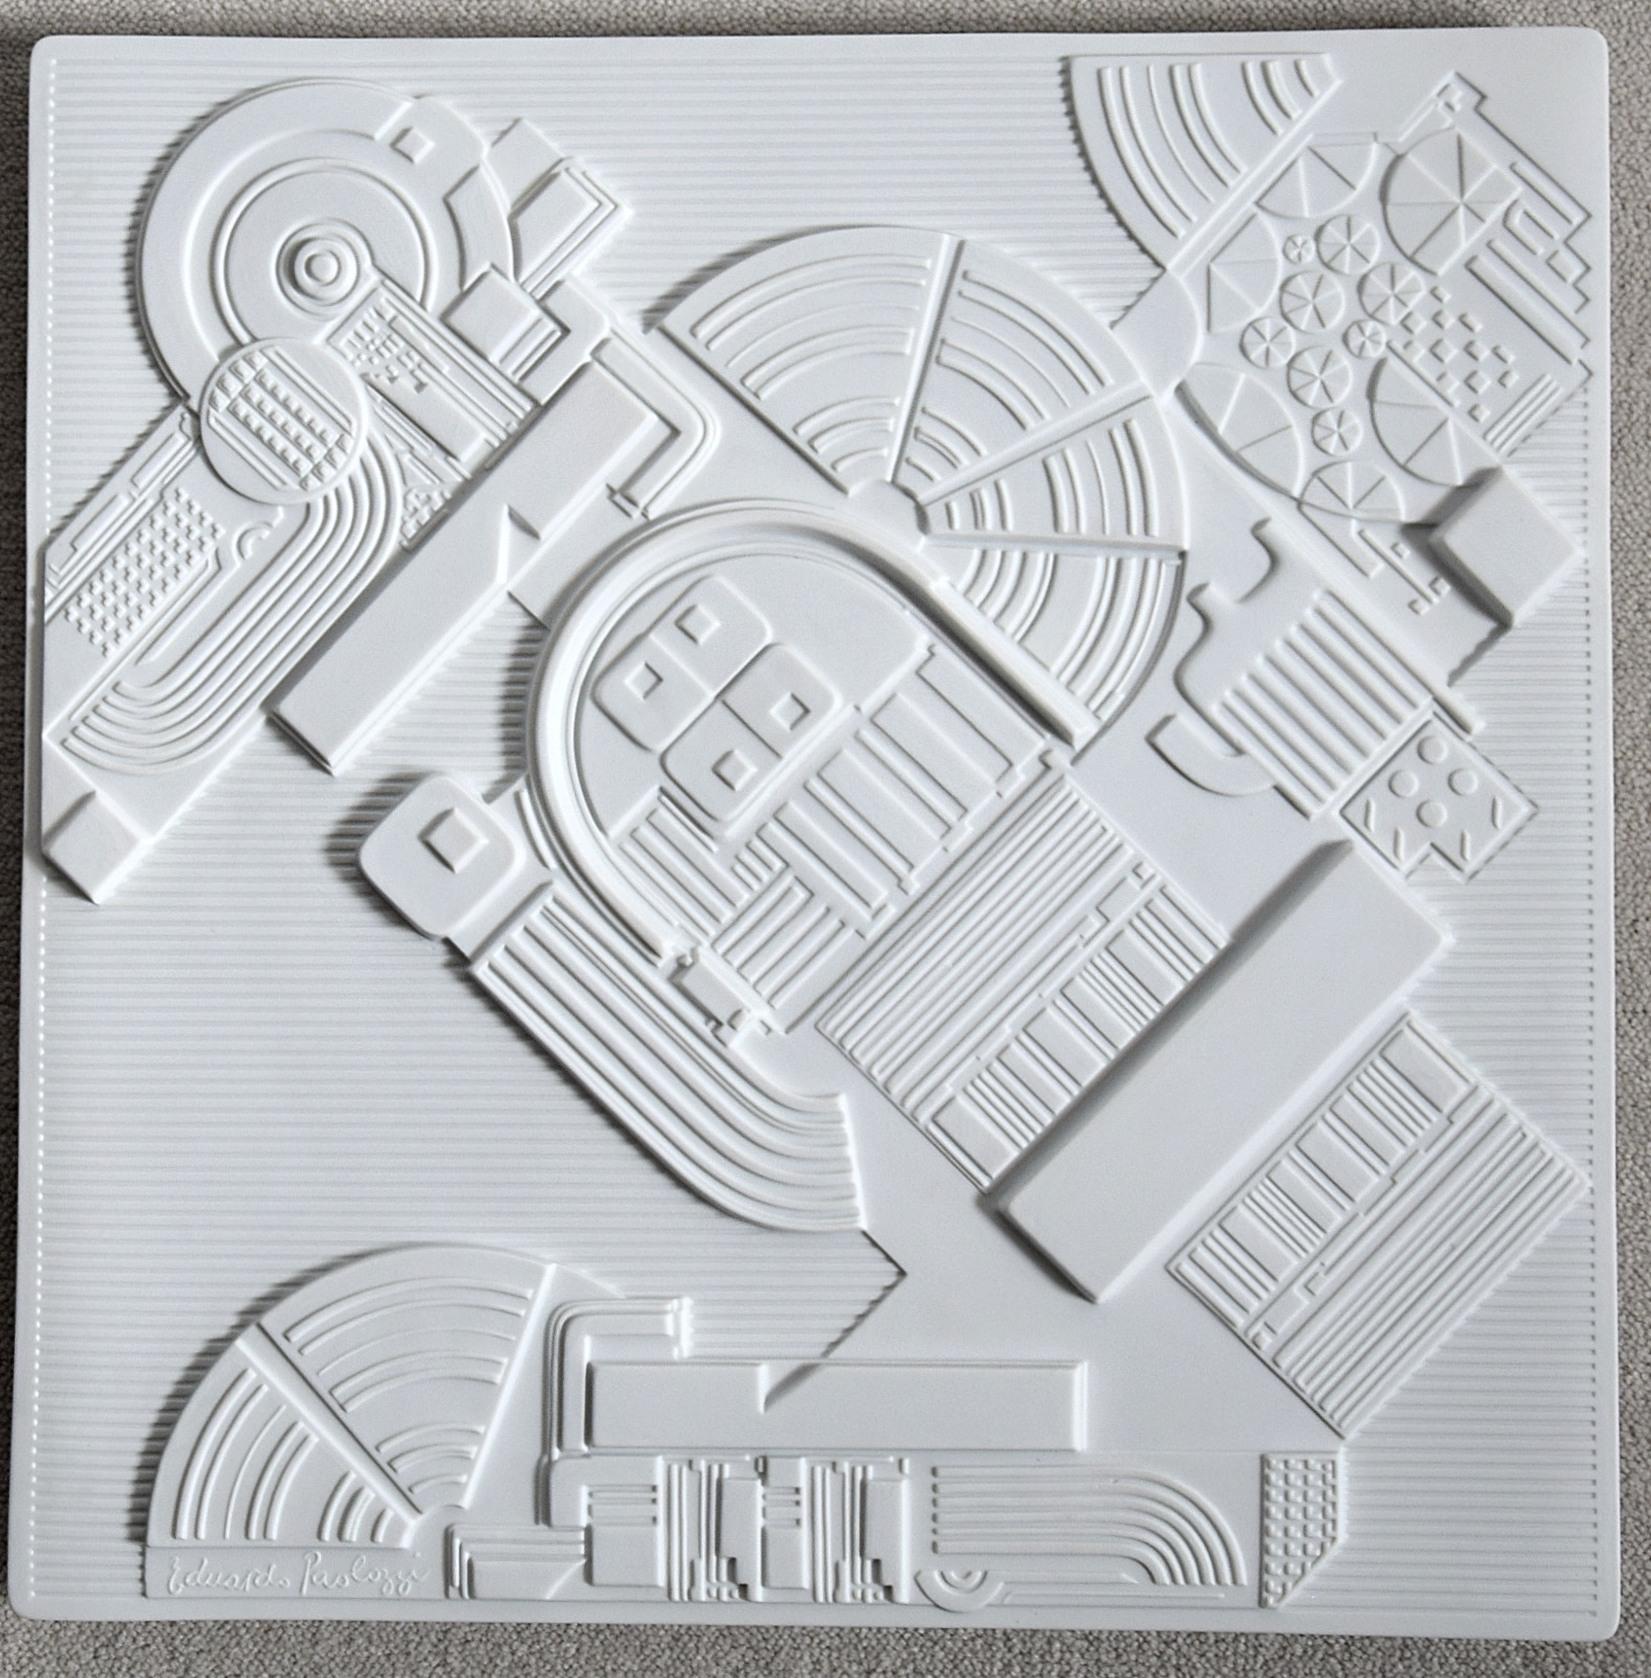 Porcelain wall sculpture or plaque in high relief by Pop Art Pioneer Eduardo Paolozzi. Produced by Rosenthal Studio Line in 1978 in a limited edition of 3,000 of which this is number 141. The Jahres teller/year plates series consisted of an annual